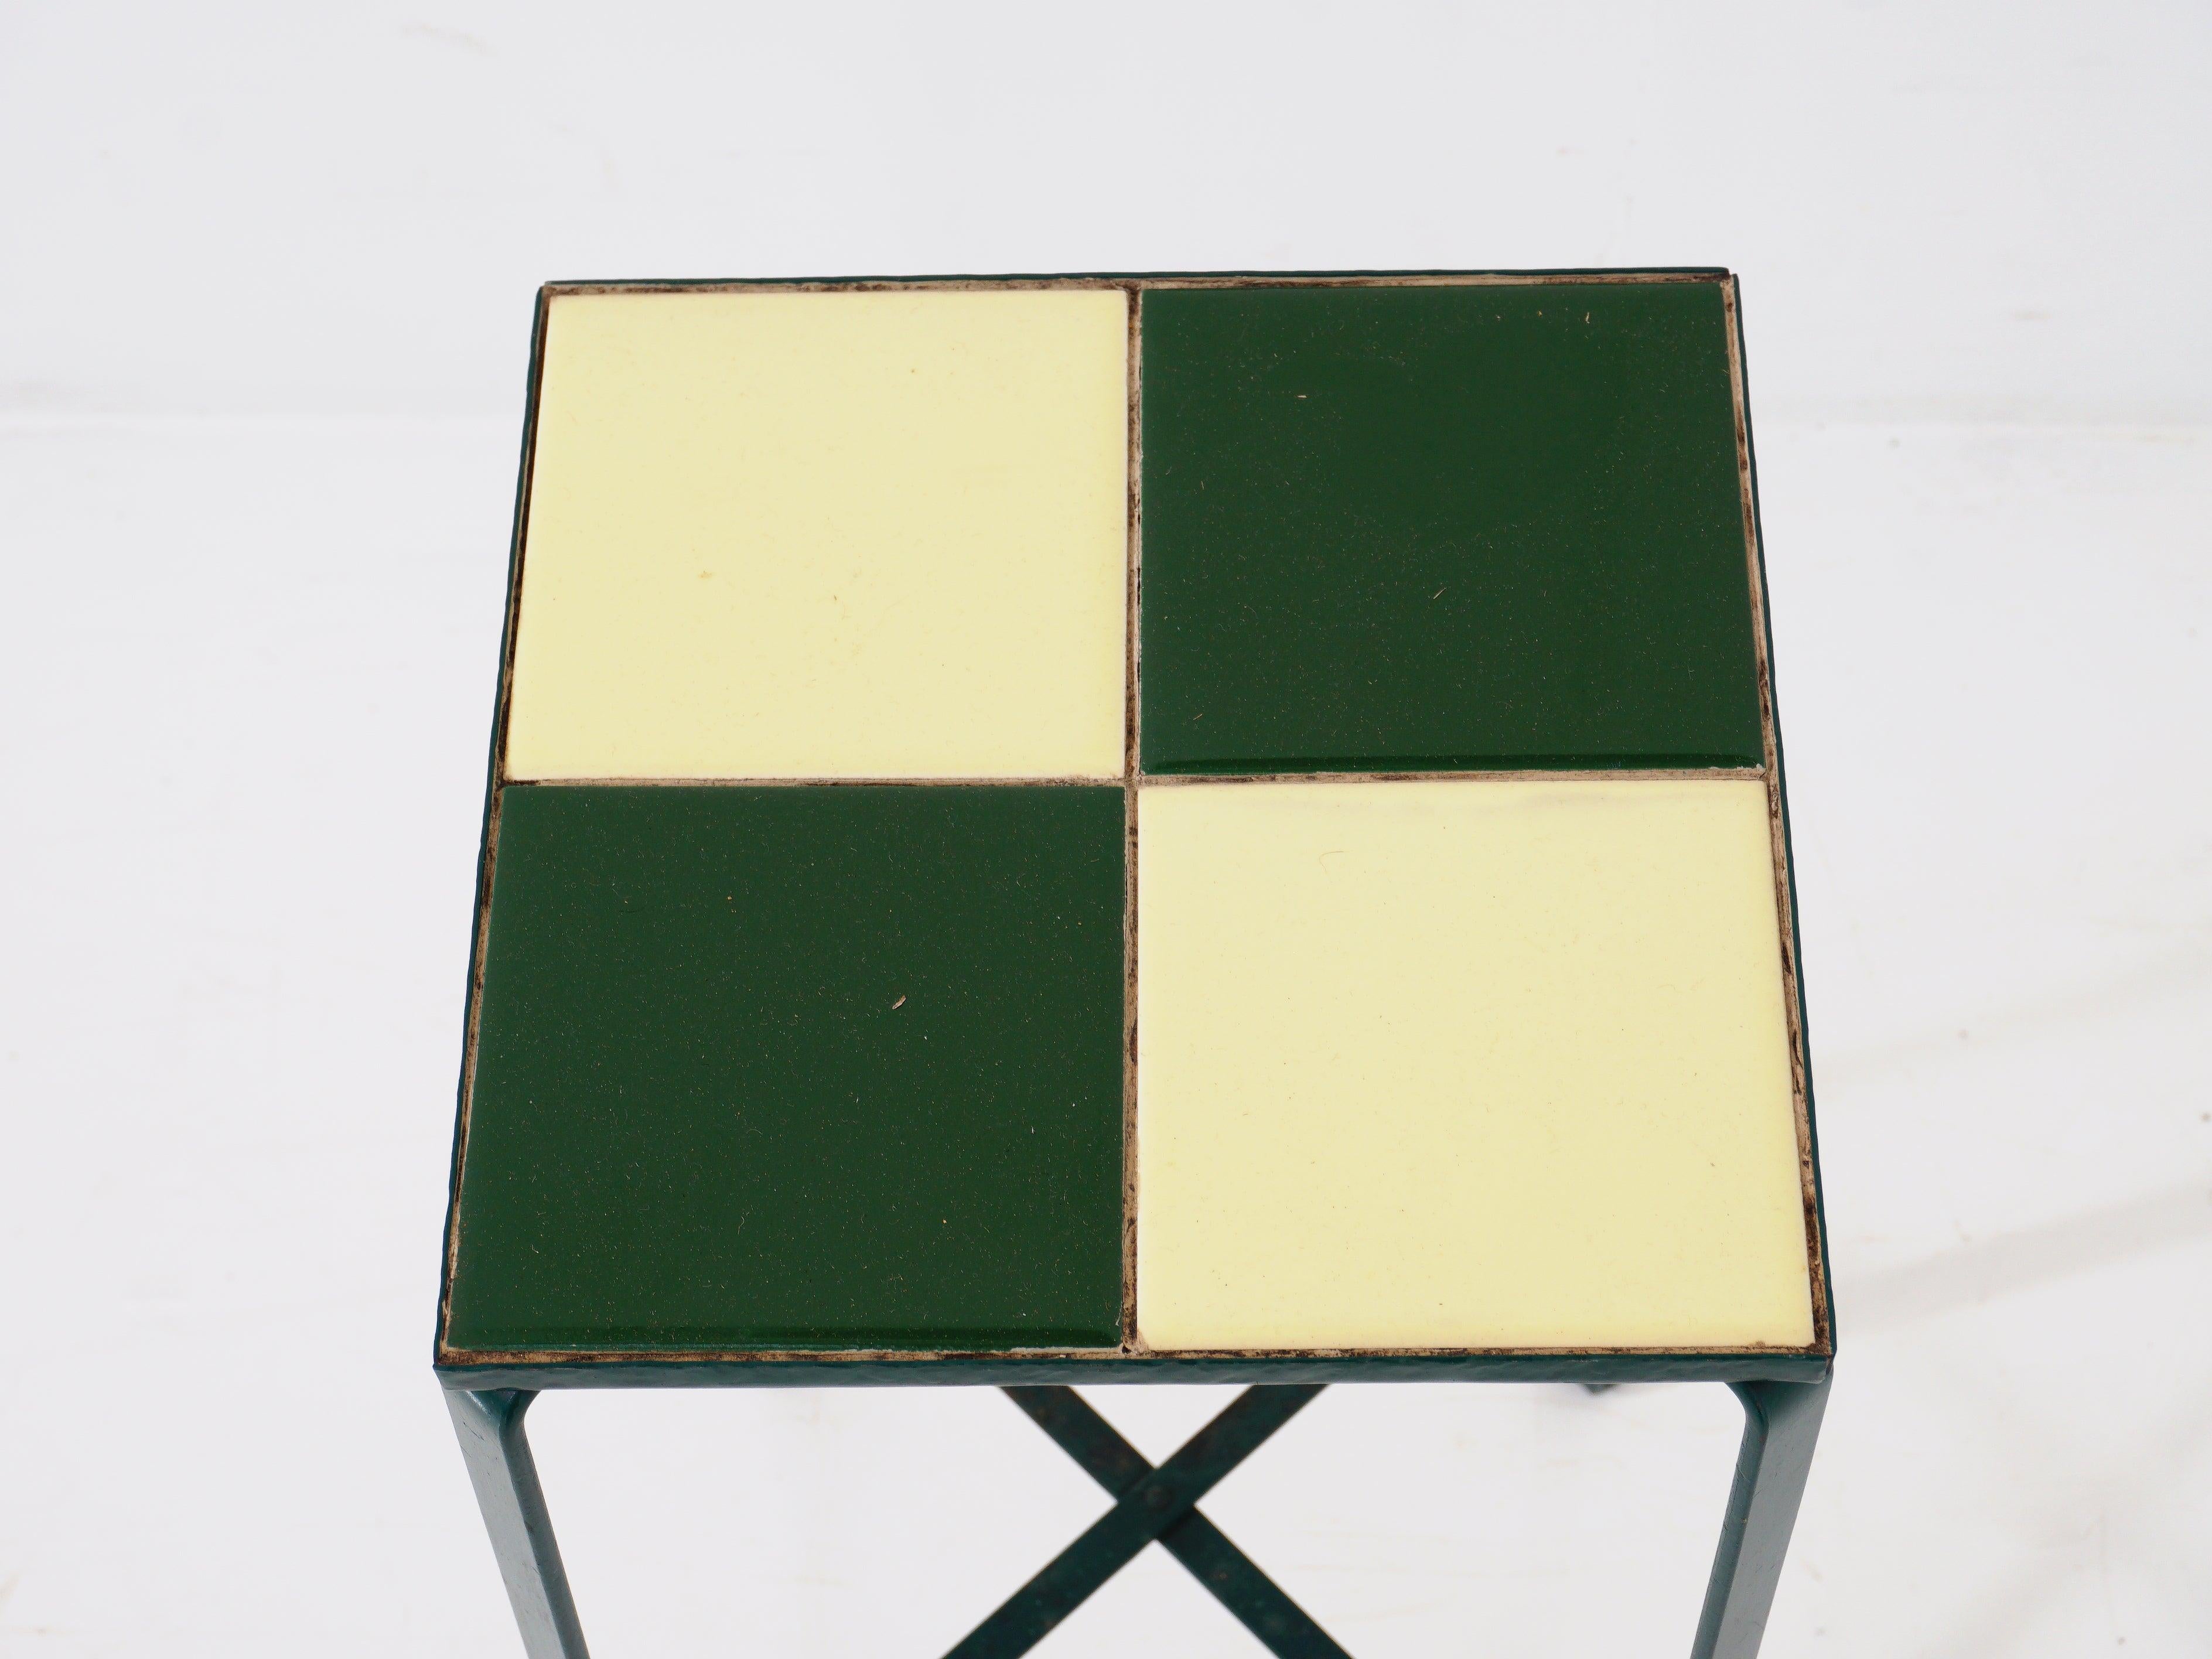 Experience the epitome of midcentury chic with this petite accent table. Featuring a striking tile top that exudes vintage charm, paired with a sleek, green wrought iron base for a pop of personality. This table effortlessly marries form and